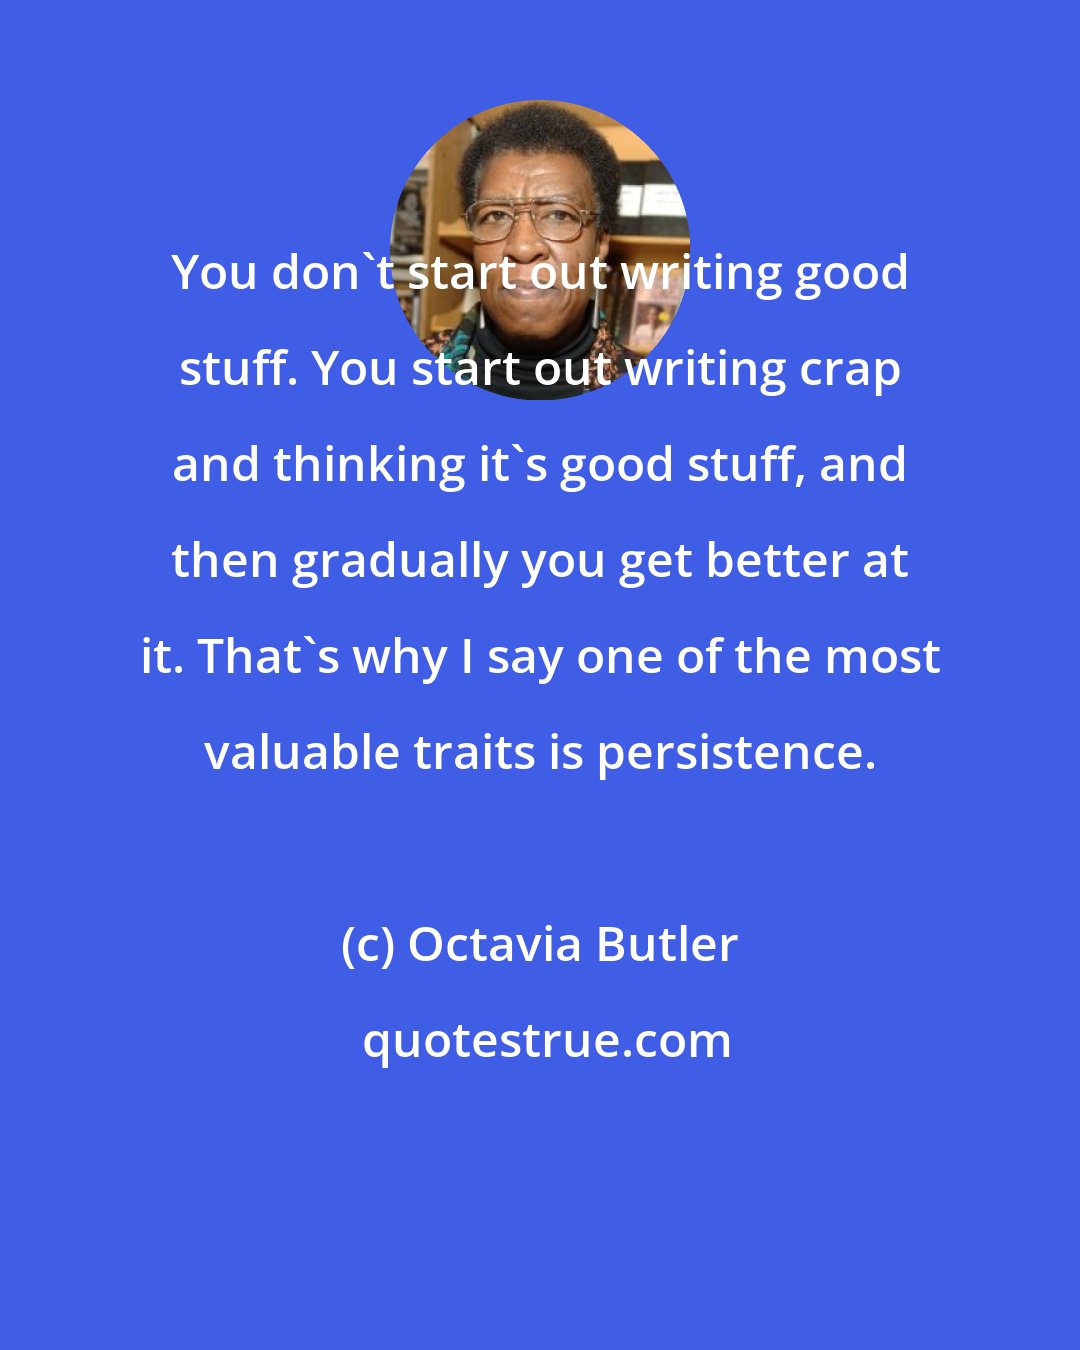 Octavia Butler: You don't start out writing good stuff. You start out writing crap and thinking it's good stuff, and then gradually you get better at it. That's why I say one of the most valuable traits is persistence.